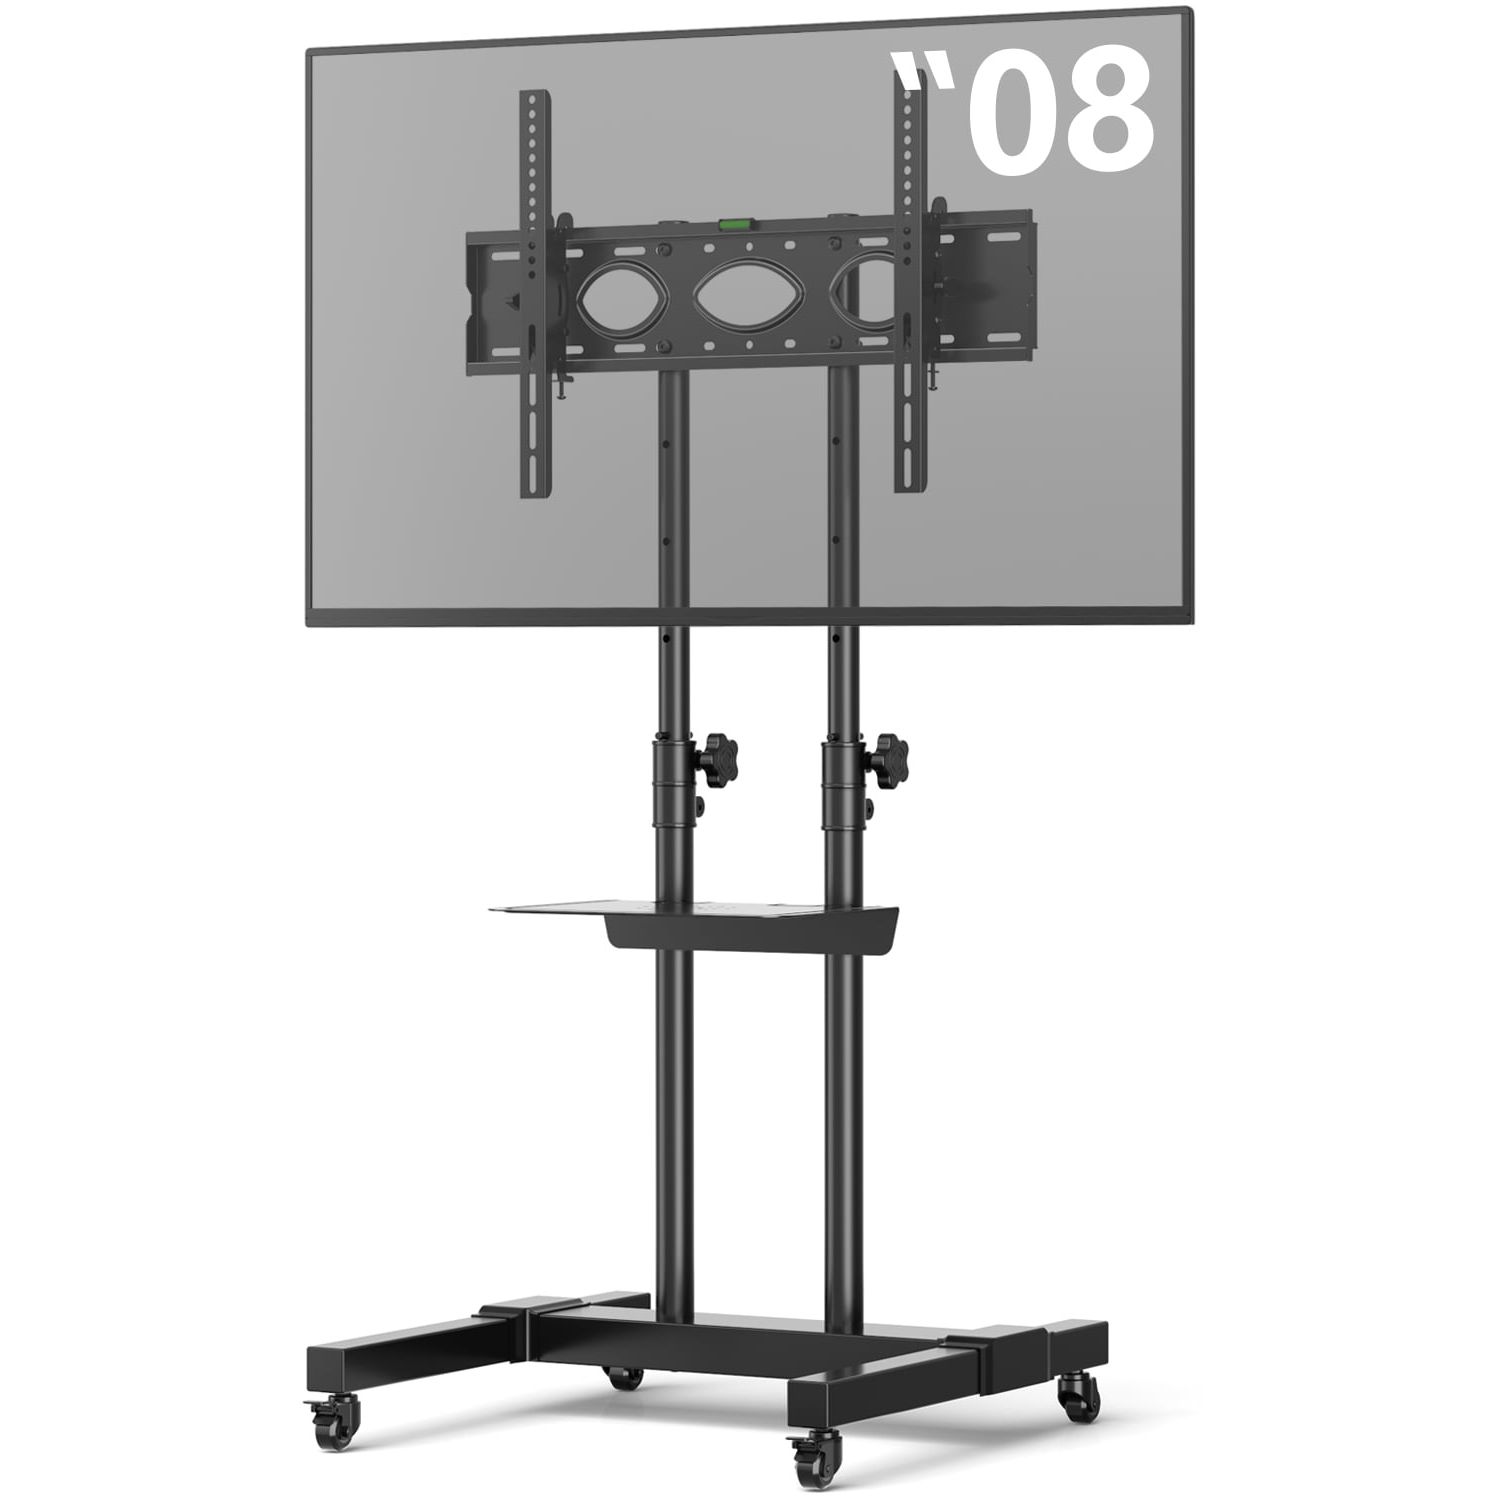 Fashionable Modern Rolling Tv Stands Pertaining To Modern Black Large Rolling Tv Stand For 32 To 80 Inch Tvs Black Metal (View 14 of 15)